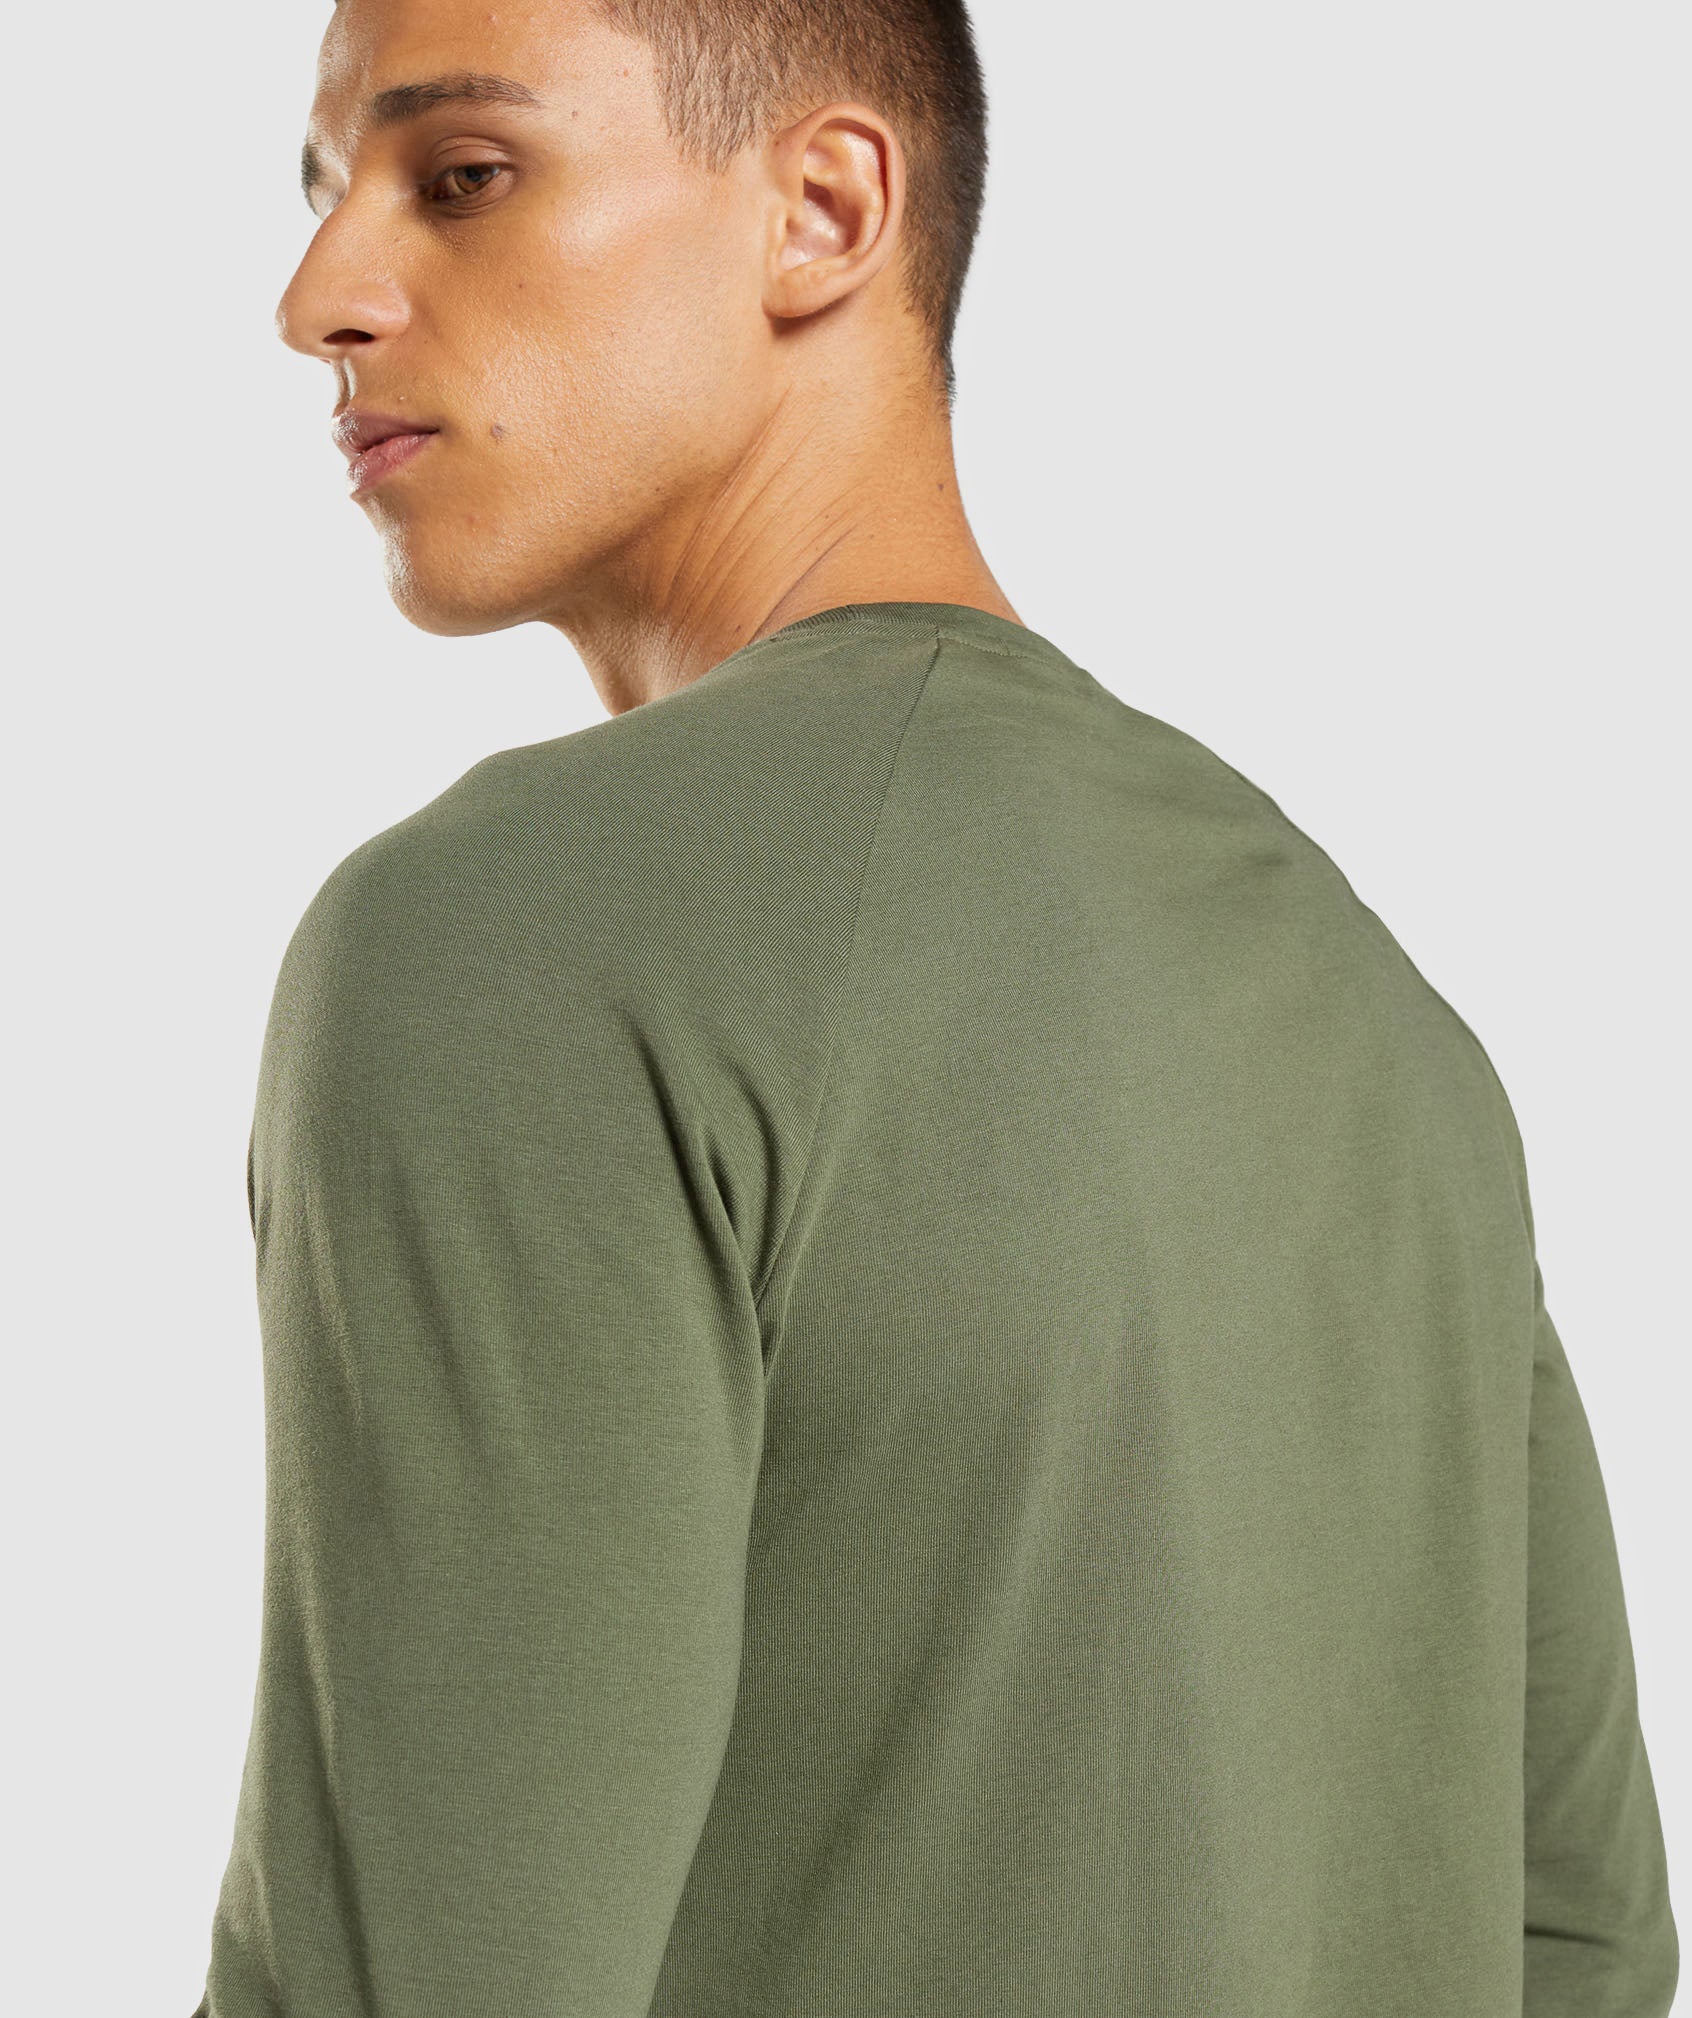 Apollo Long Sleeve T-Shirt in Core Olive - view 7